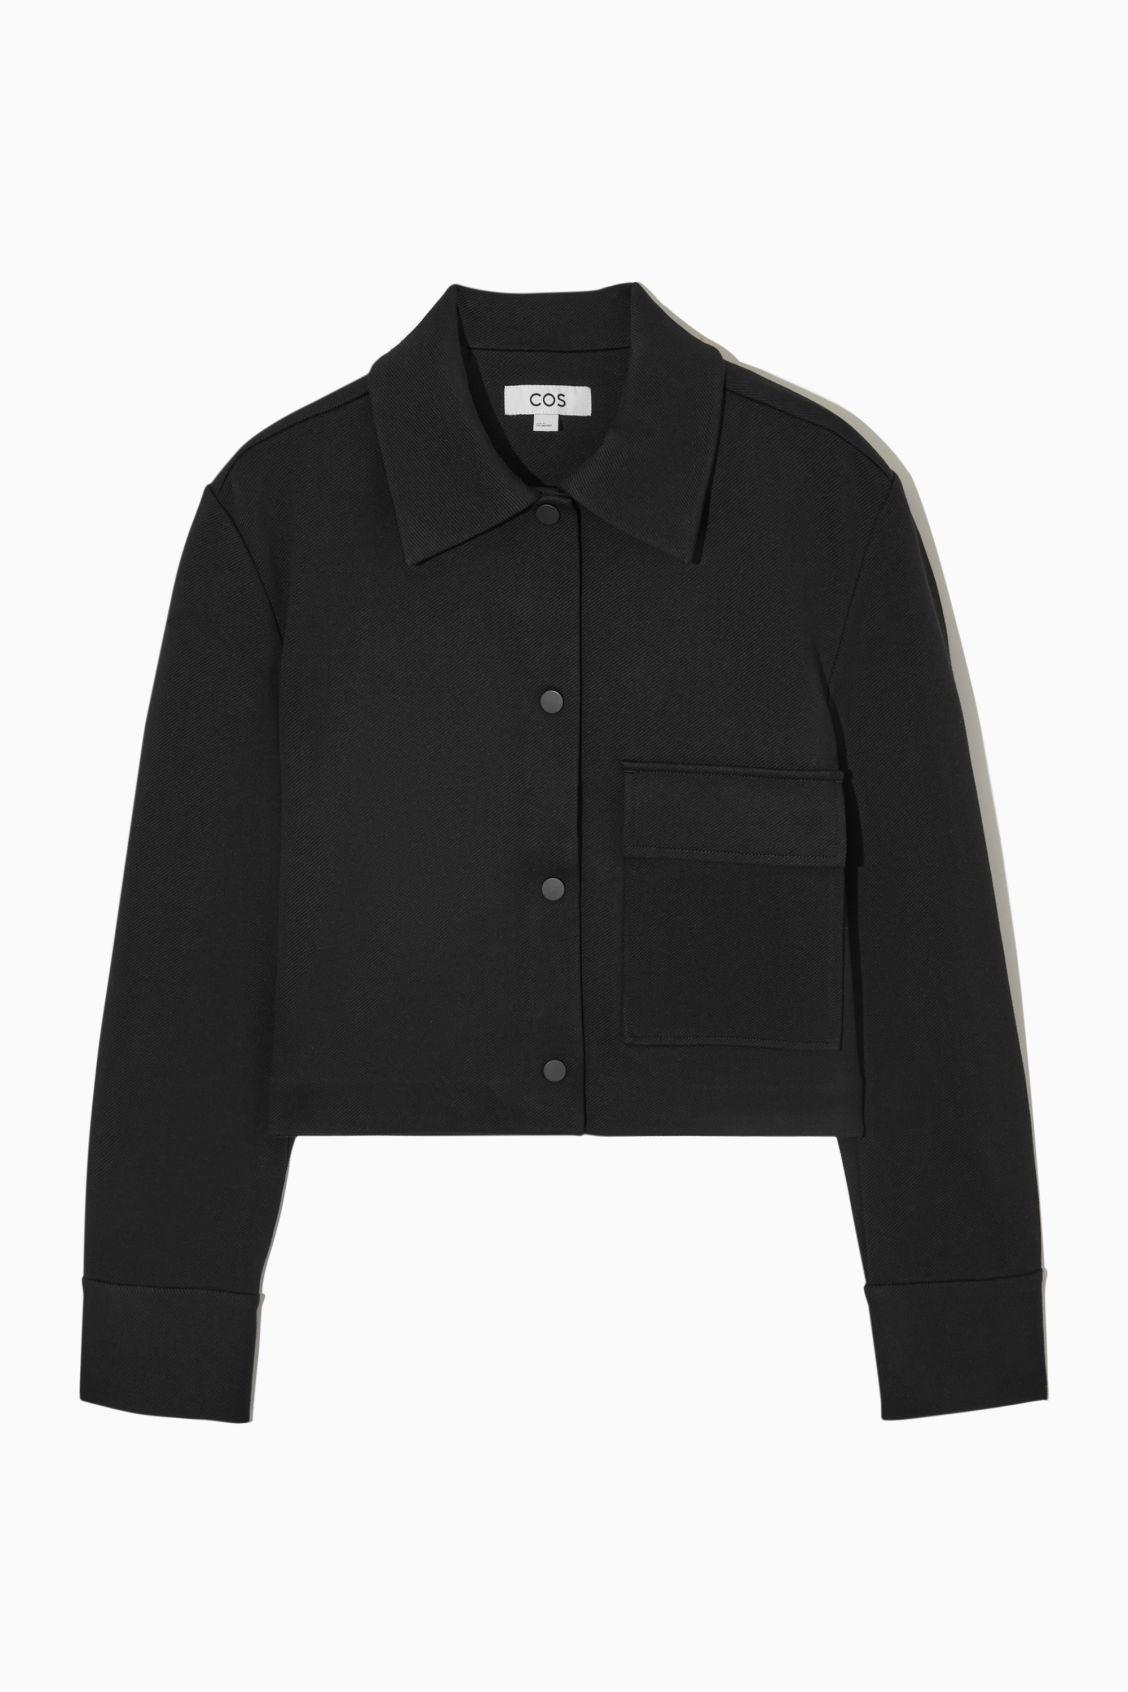 COS Cropped Twill Jacket in Black | Lyst